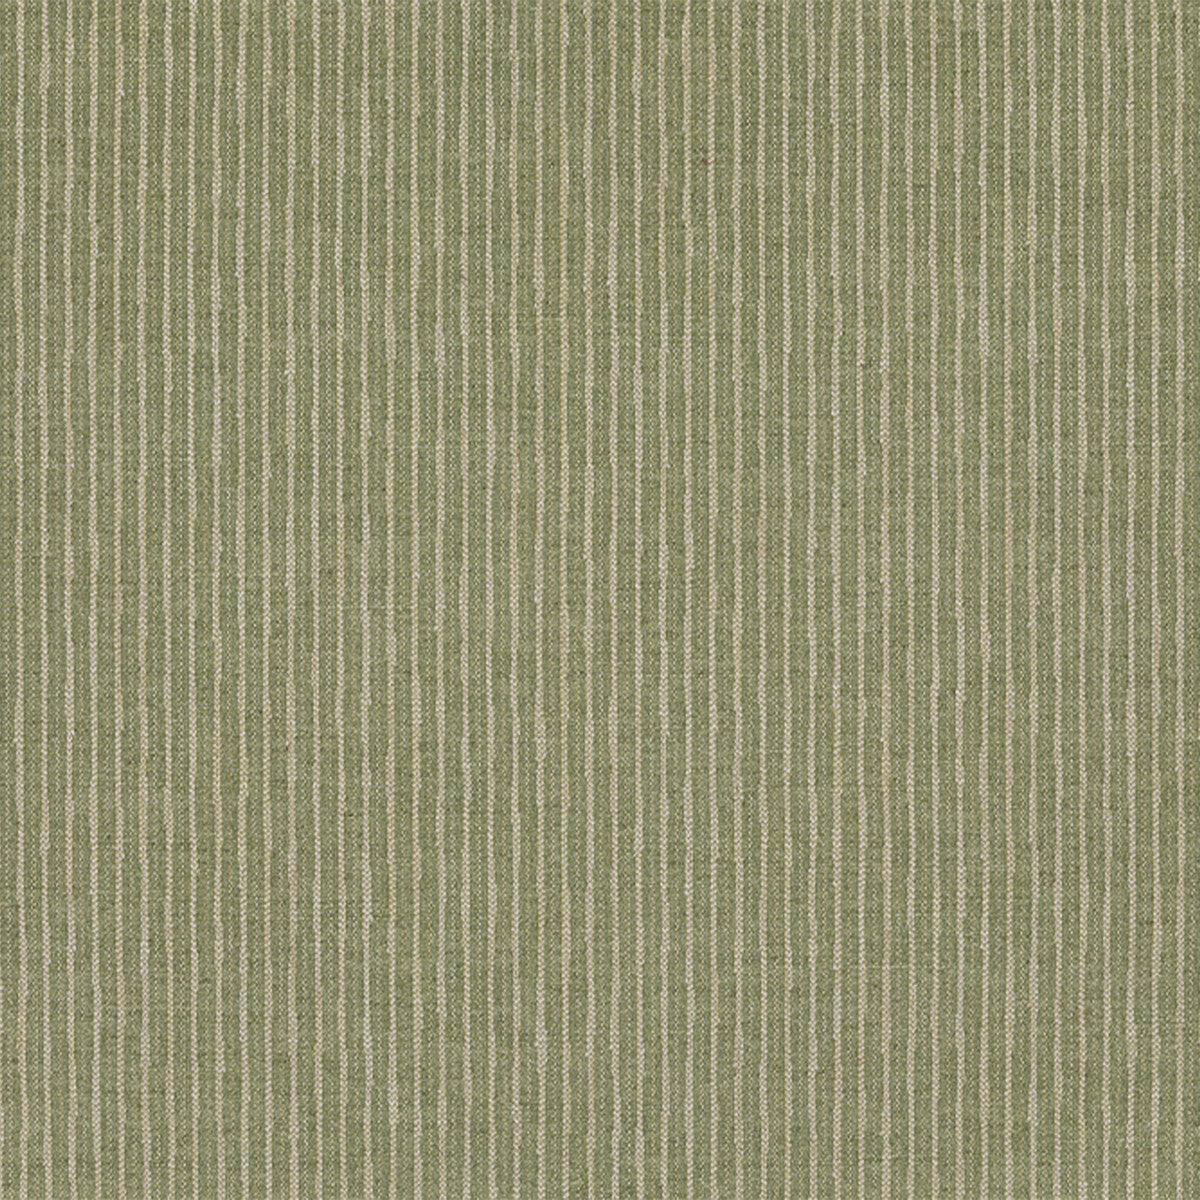 Bailey fabric in moss color - pattern BFC-3700.3.0 - by Lee Jofa in the Blithfield collection